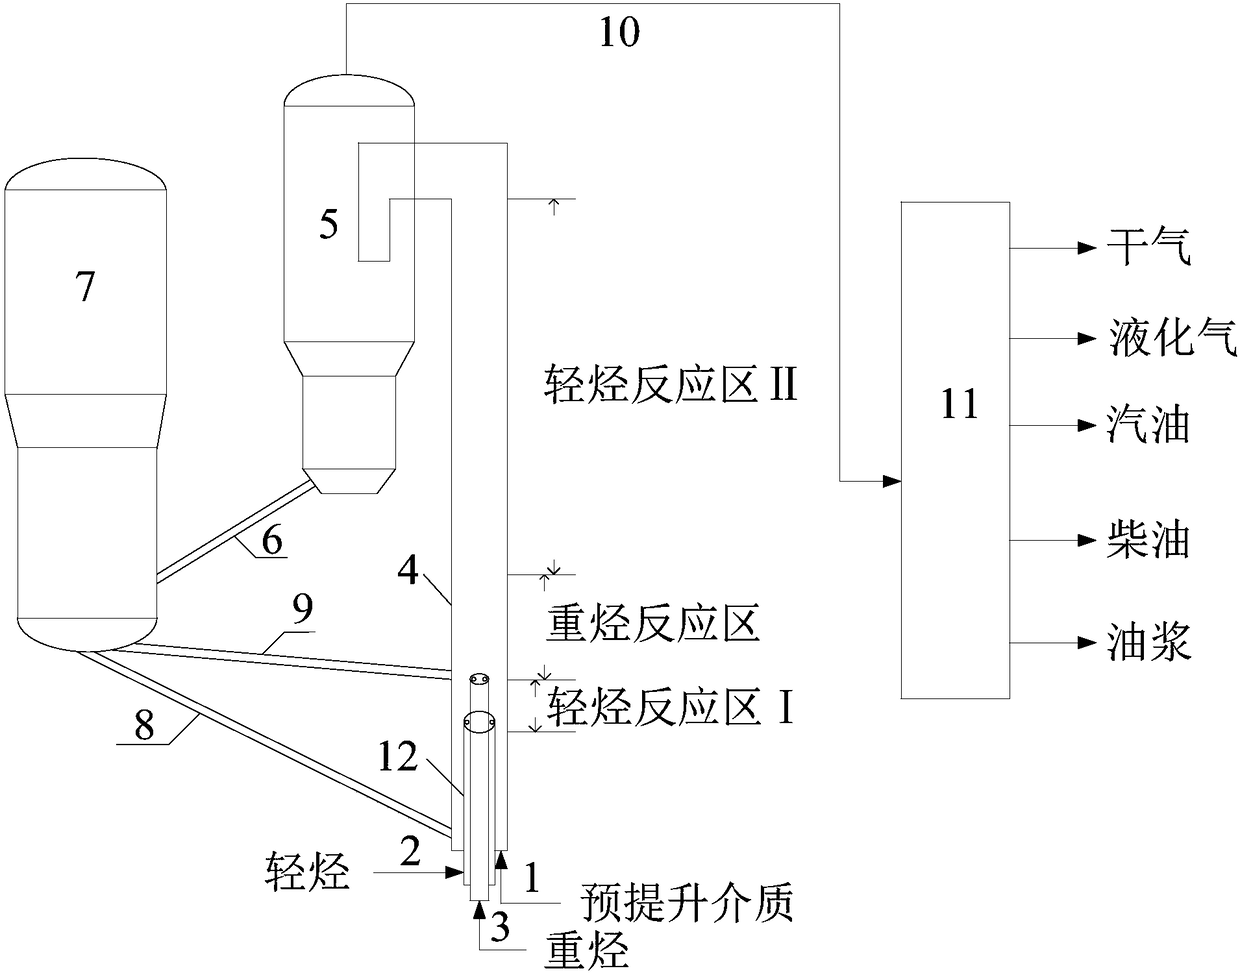 Catalytic cracking conversion method for increasing yield of gasoline and reducing oil slurry